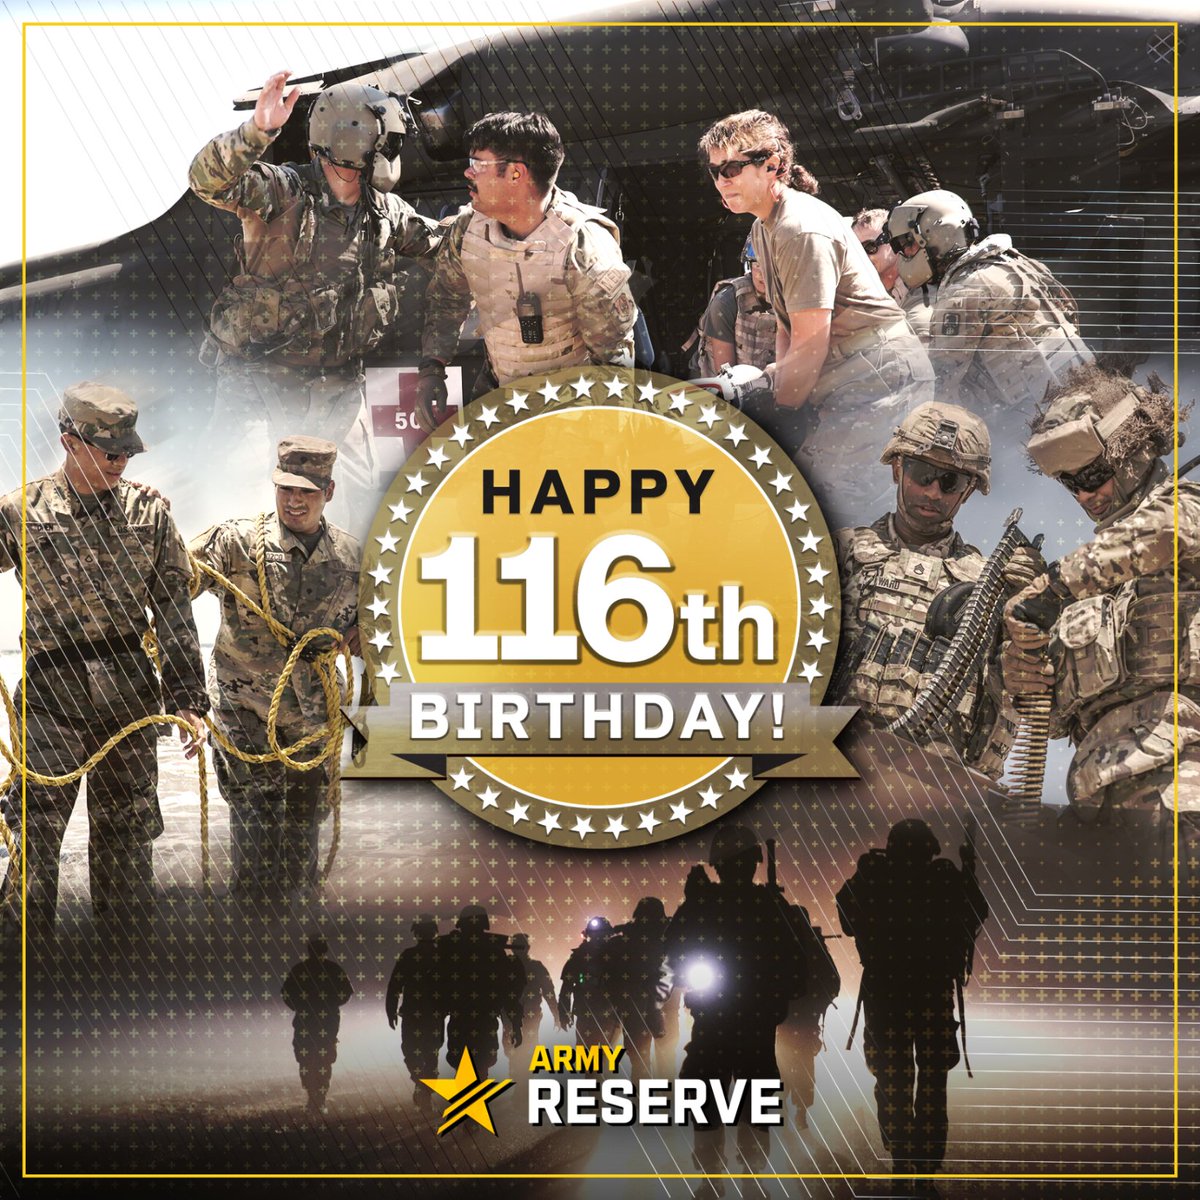 Happy 116th Birthday to the U.S. Army Reserve! Chaplains and Religious Affairs Specialists are among the nearly 190,000 Army Reserve Soldiers serving around the world.

#USARbirthday116 | #ArmyReserve